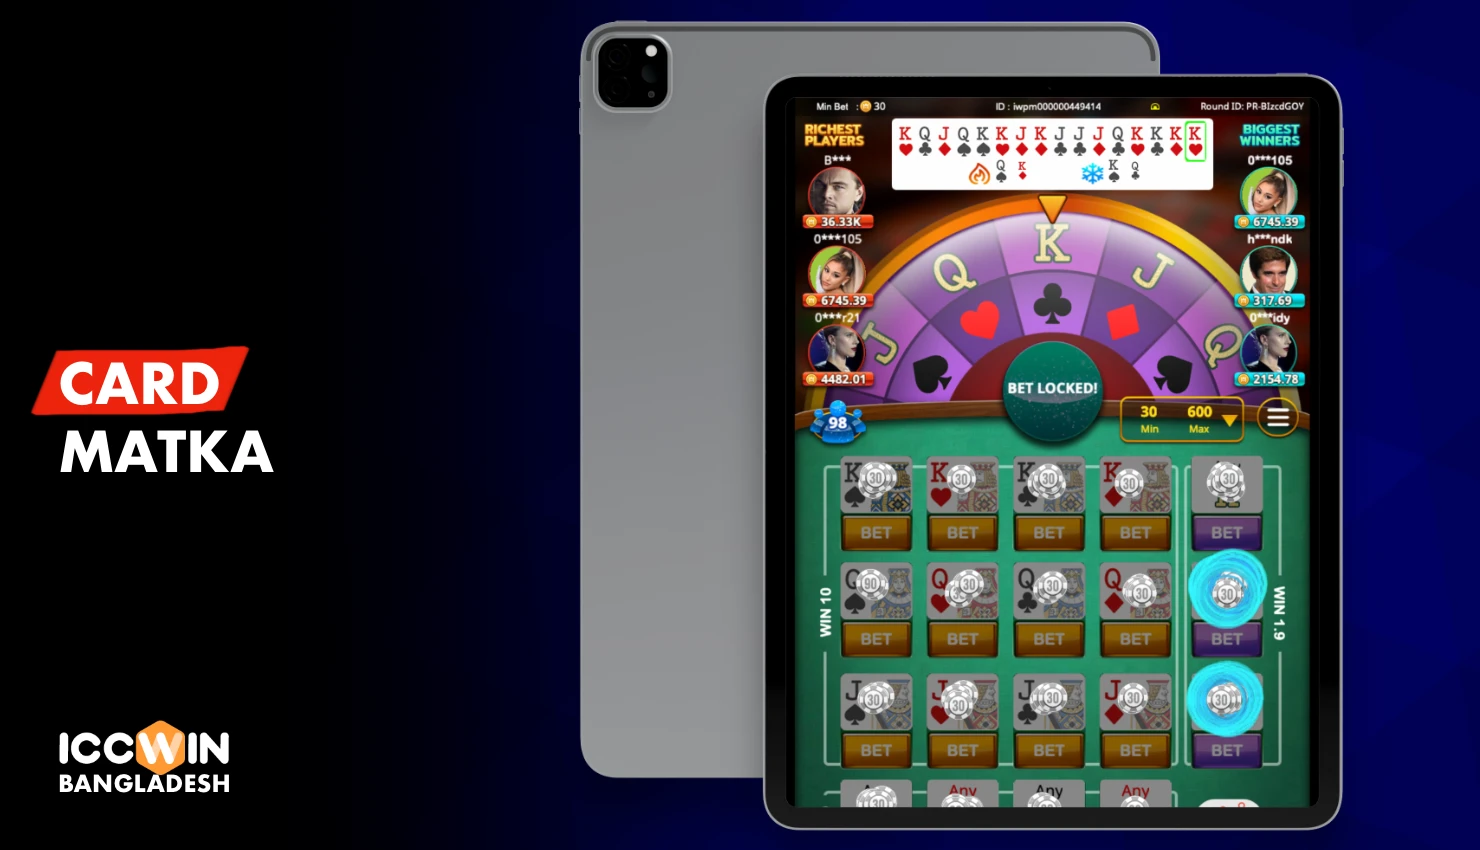 Card Matka is a popular game that you will find on the Iccwin platform